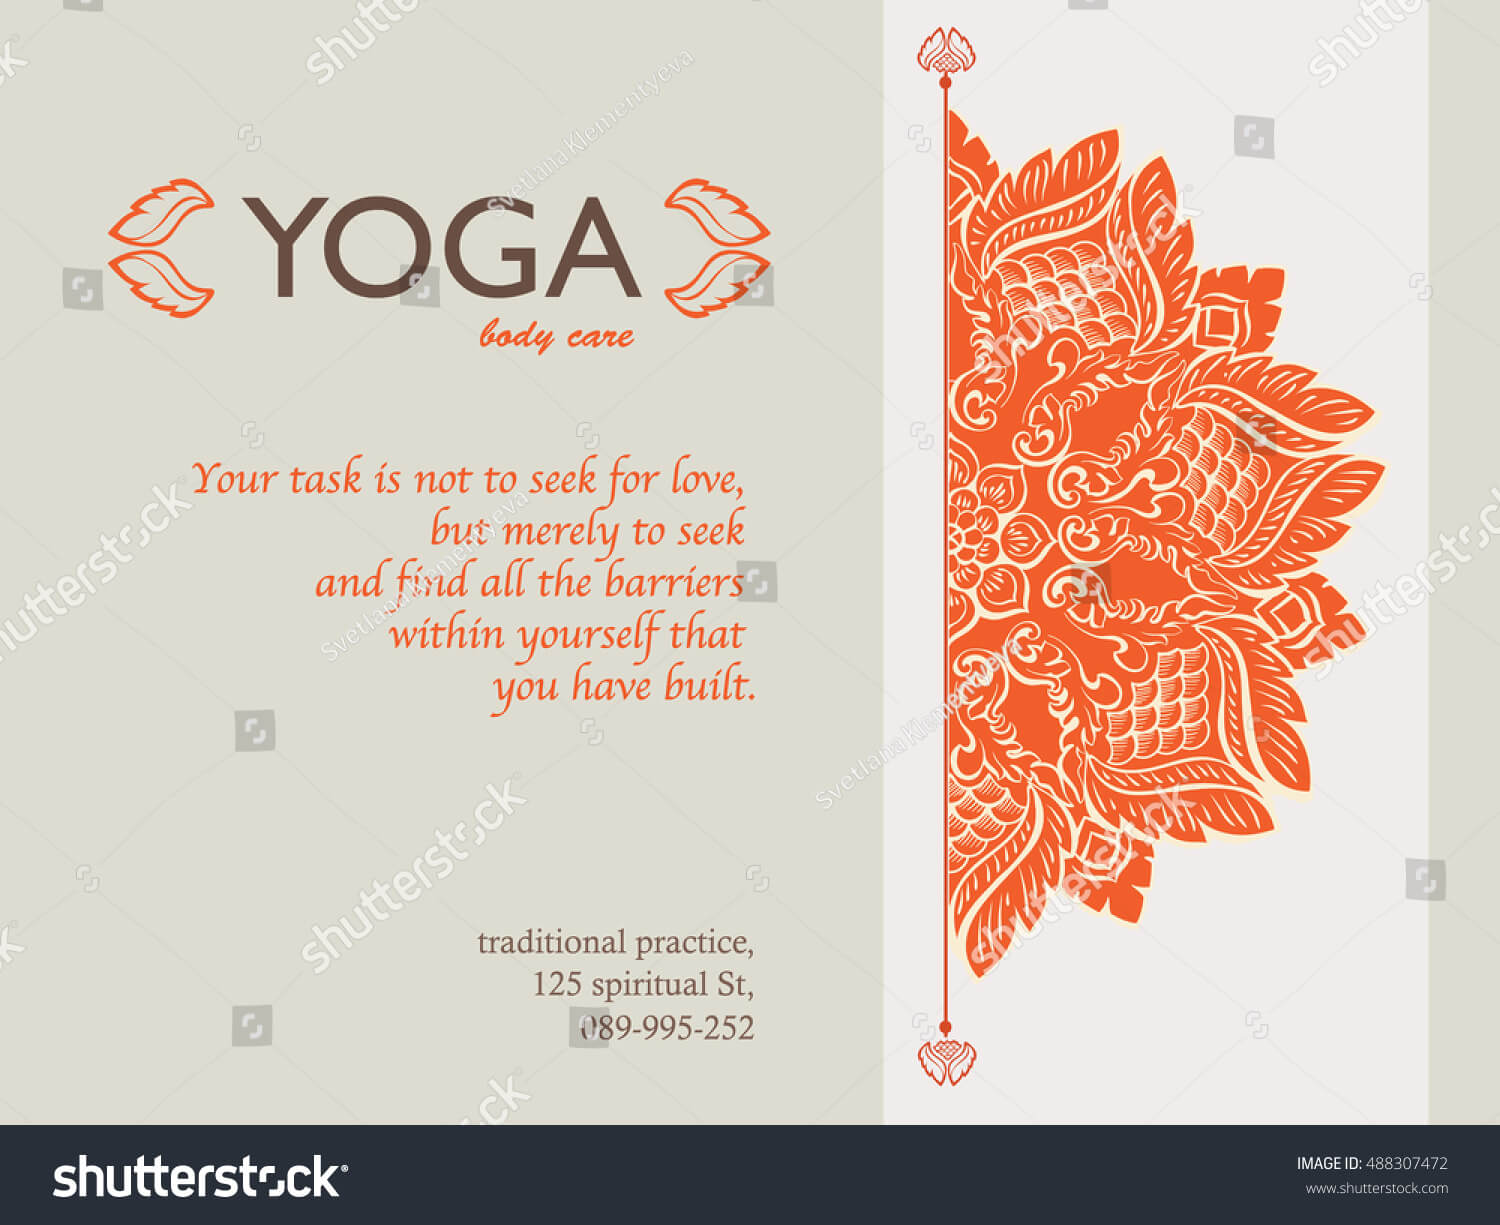 Yoga Gift Certificate Templates | Gift Certificate Templates For Yoga Gift Certificate Template Free